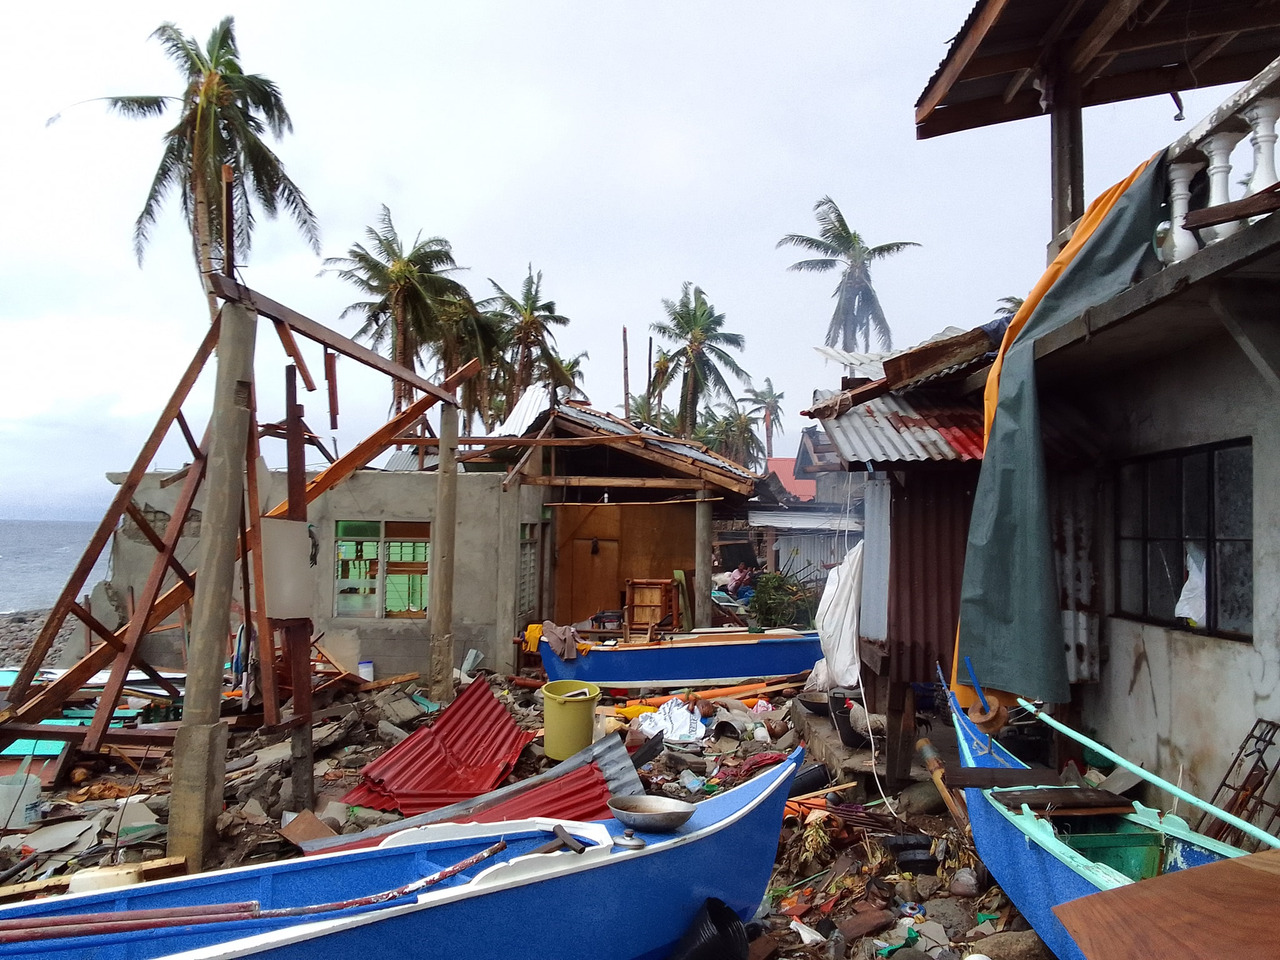 Destroyed houses and boats lie strewn about after Cyclone Rai hit the Philippines.